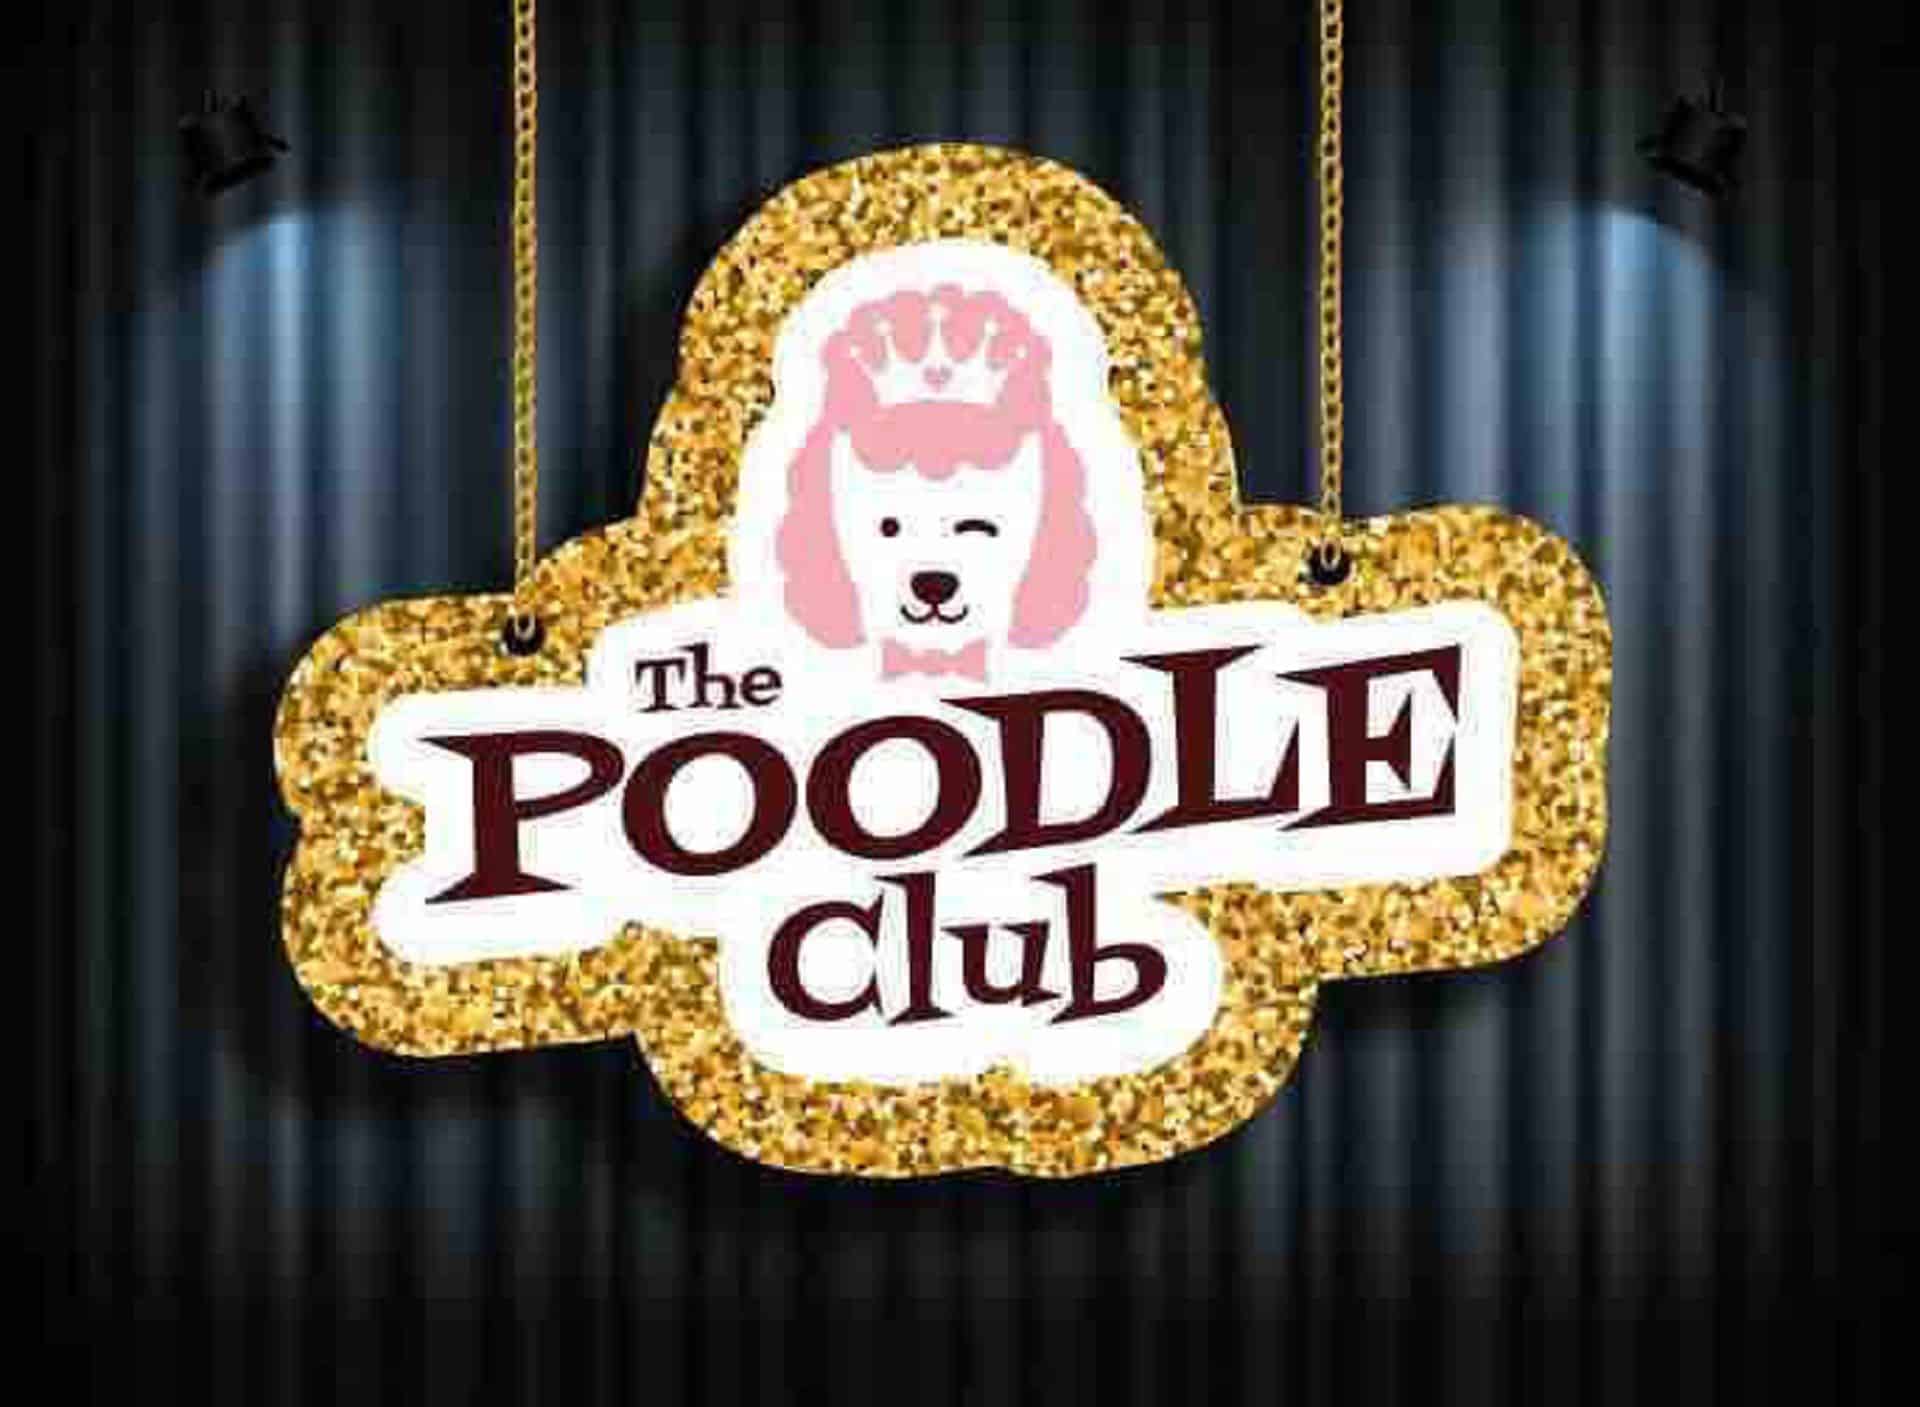 The Poodle Club in UK